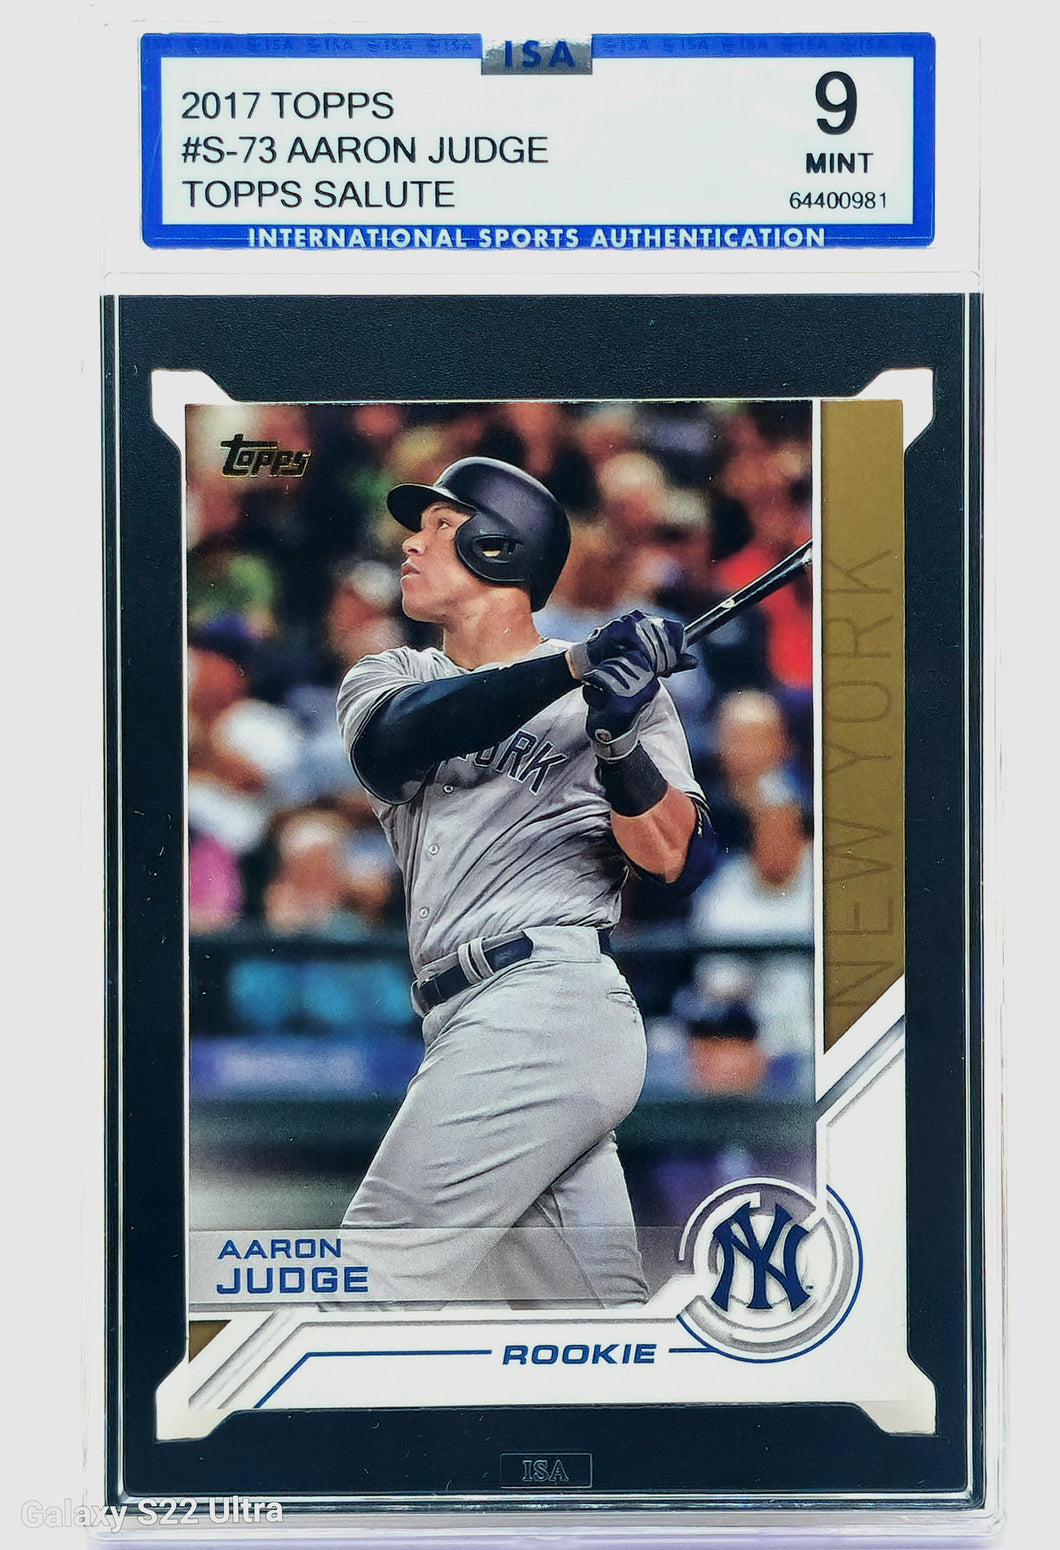 2017 Topps Aaron Judge RC Salute #S-73 insert rookie card New York Yankees ISA 9 Mint